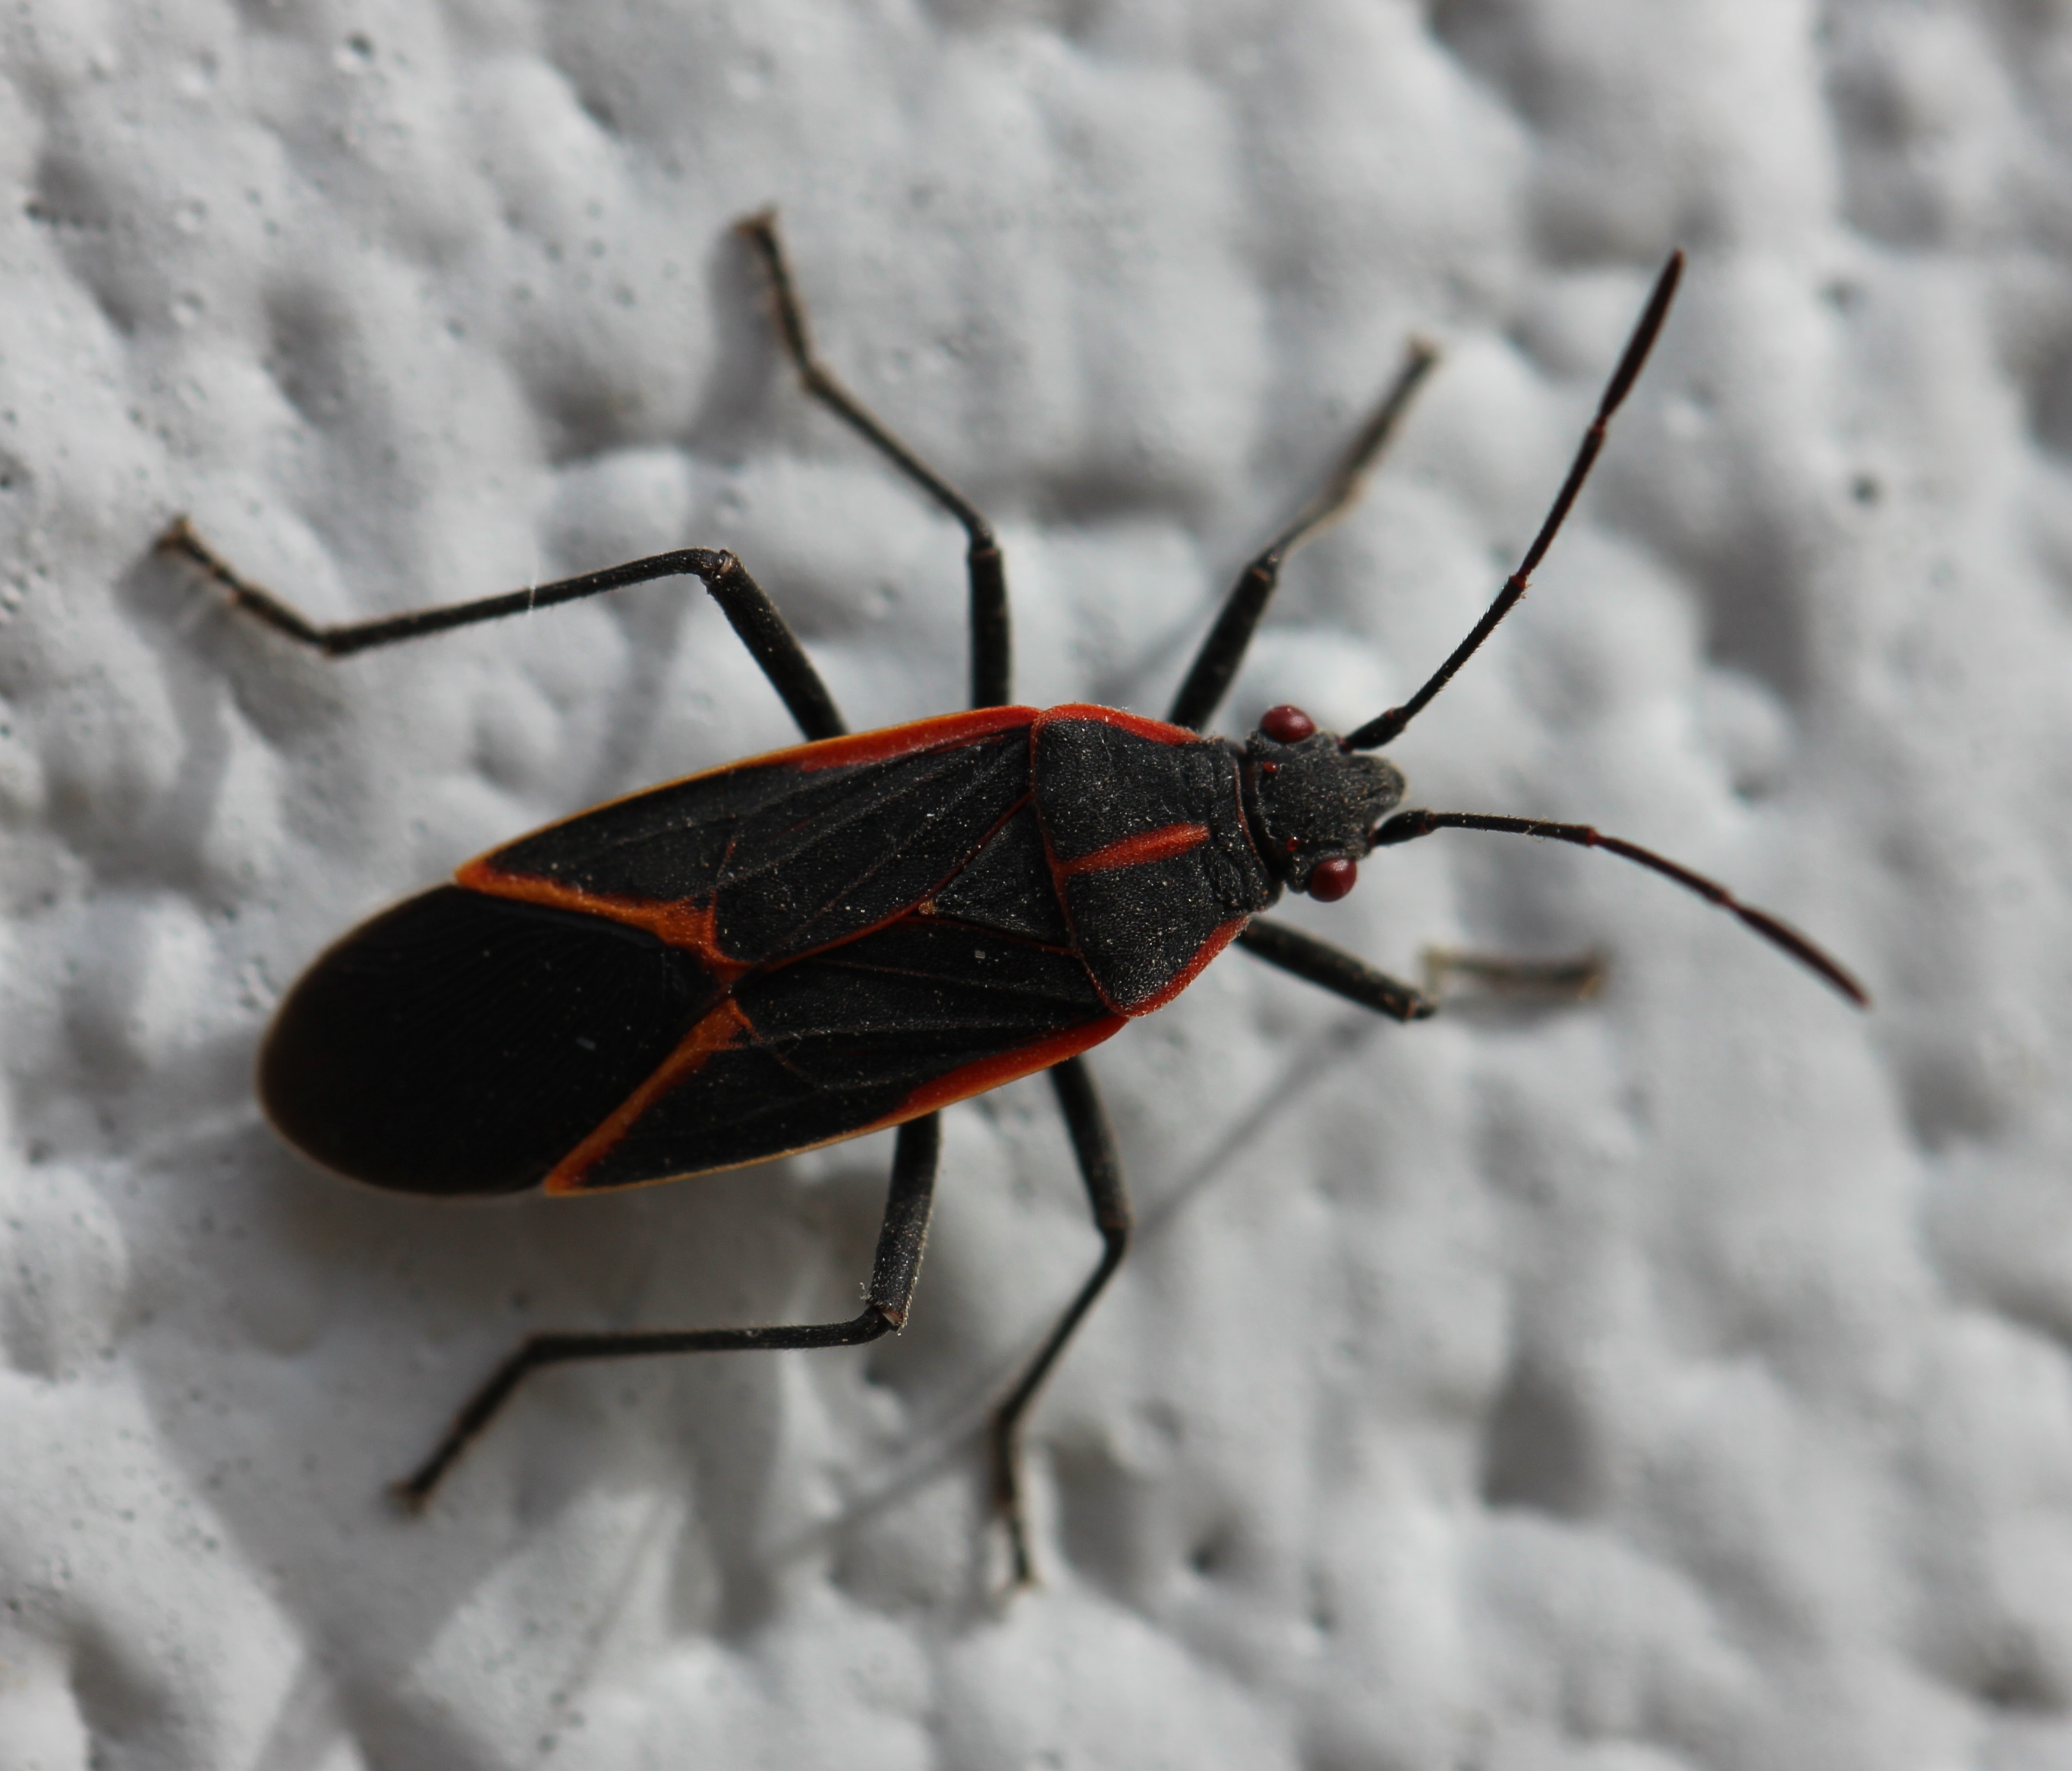 A black and orange bug on a white background with red eyes and two antenai